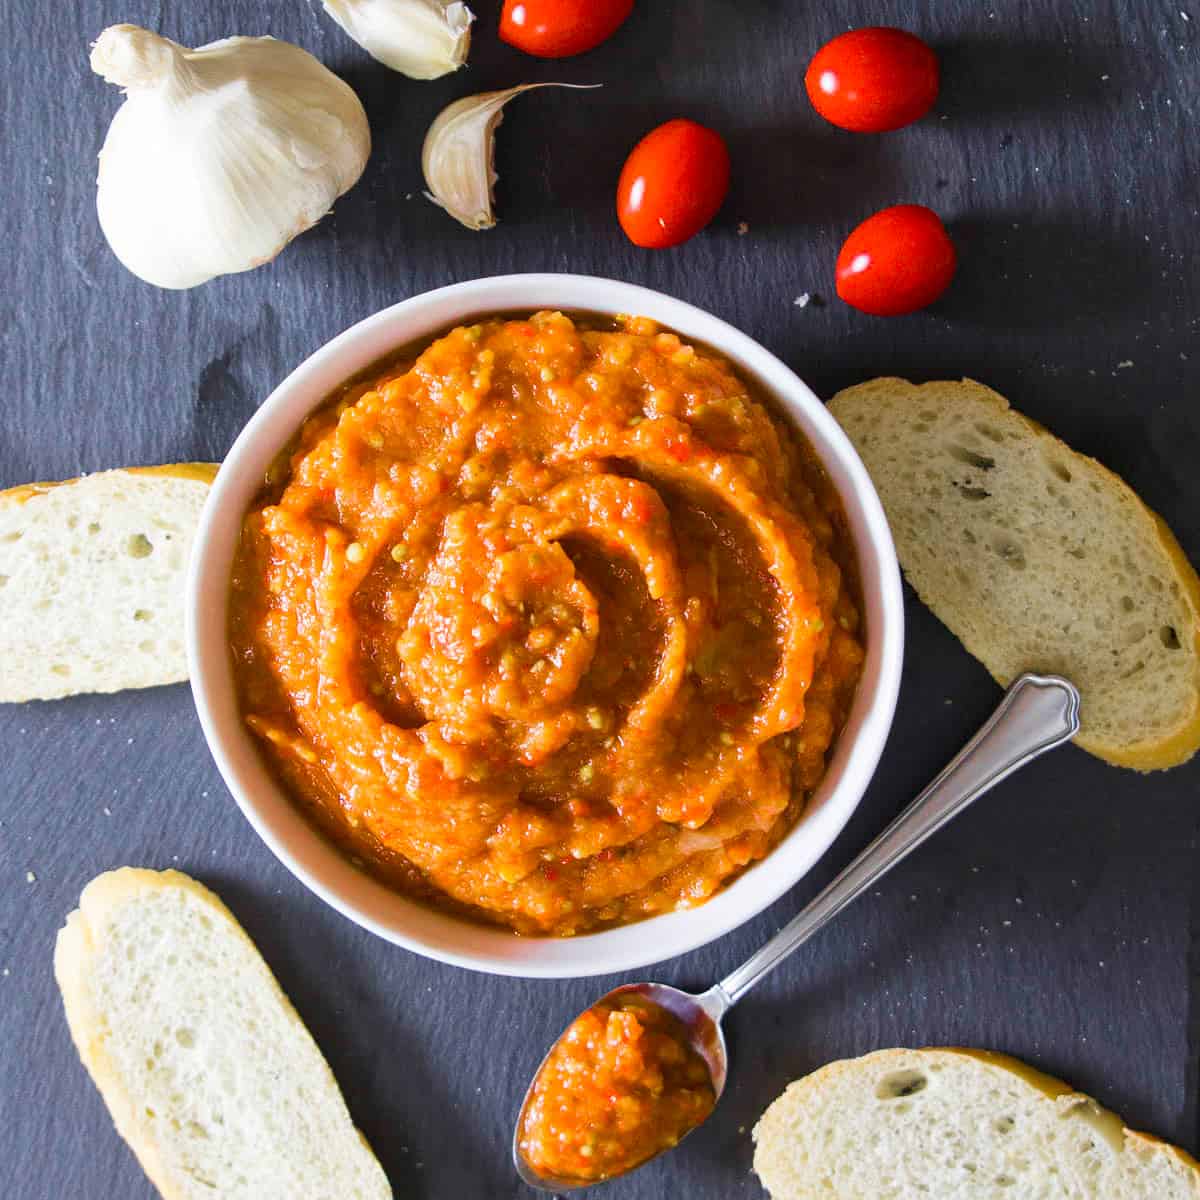 eggplant spread ikra, in a white bowl with tomatoes and bread around